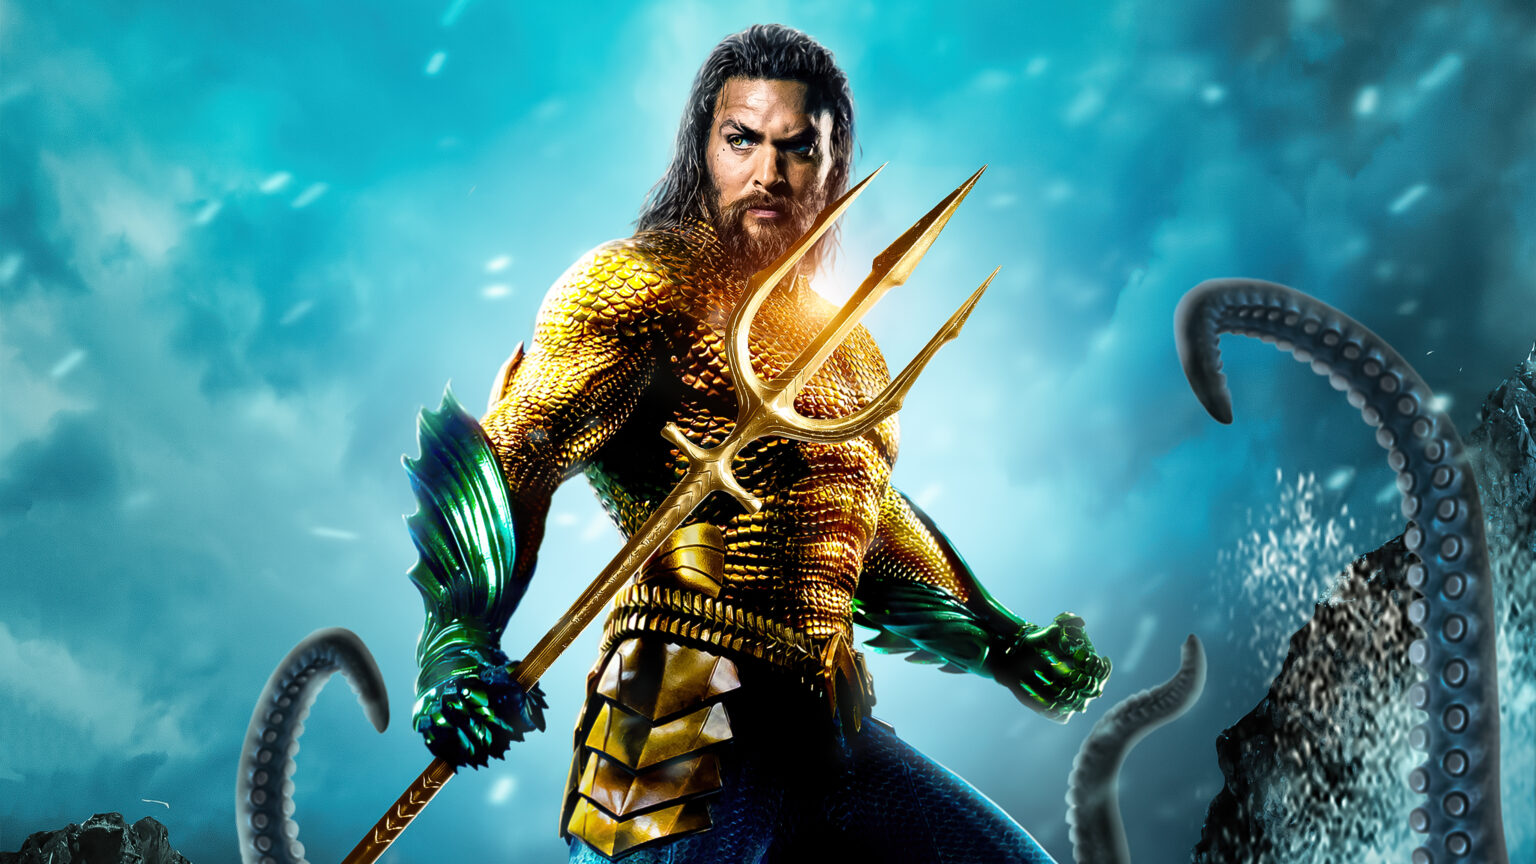 Download aquaman wallpaper 4k download for android Jpg - Cyberpunkwall